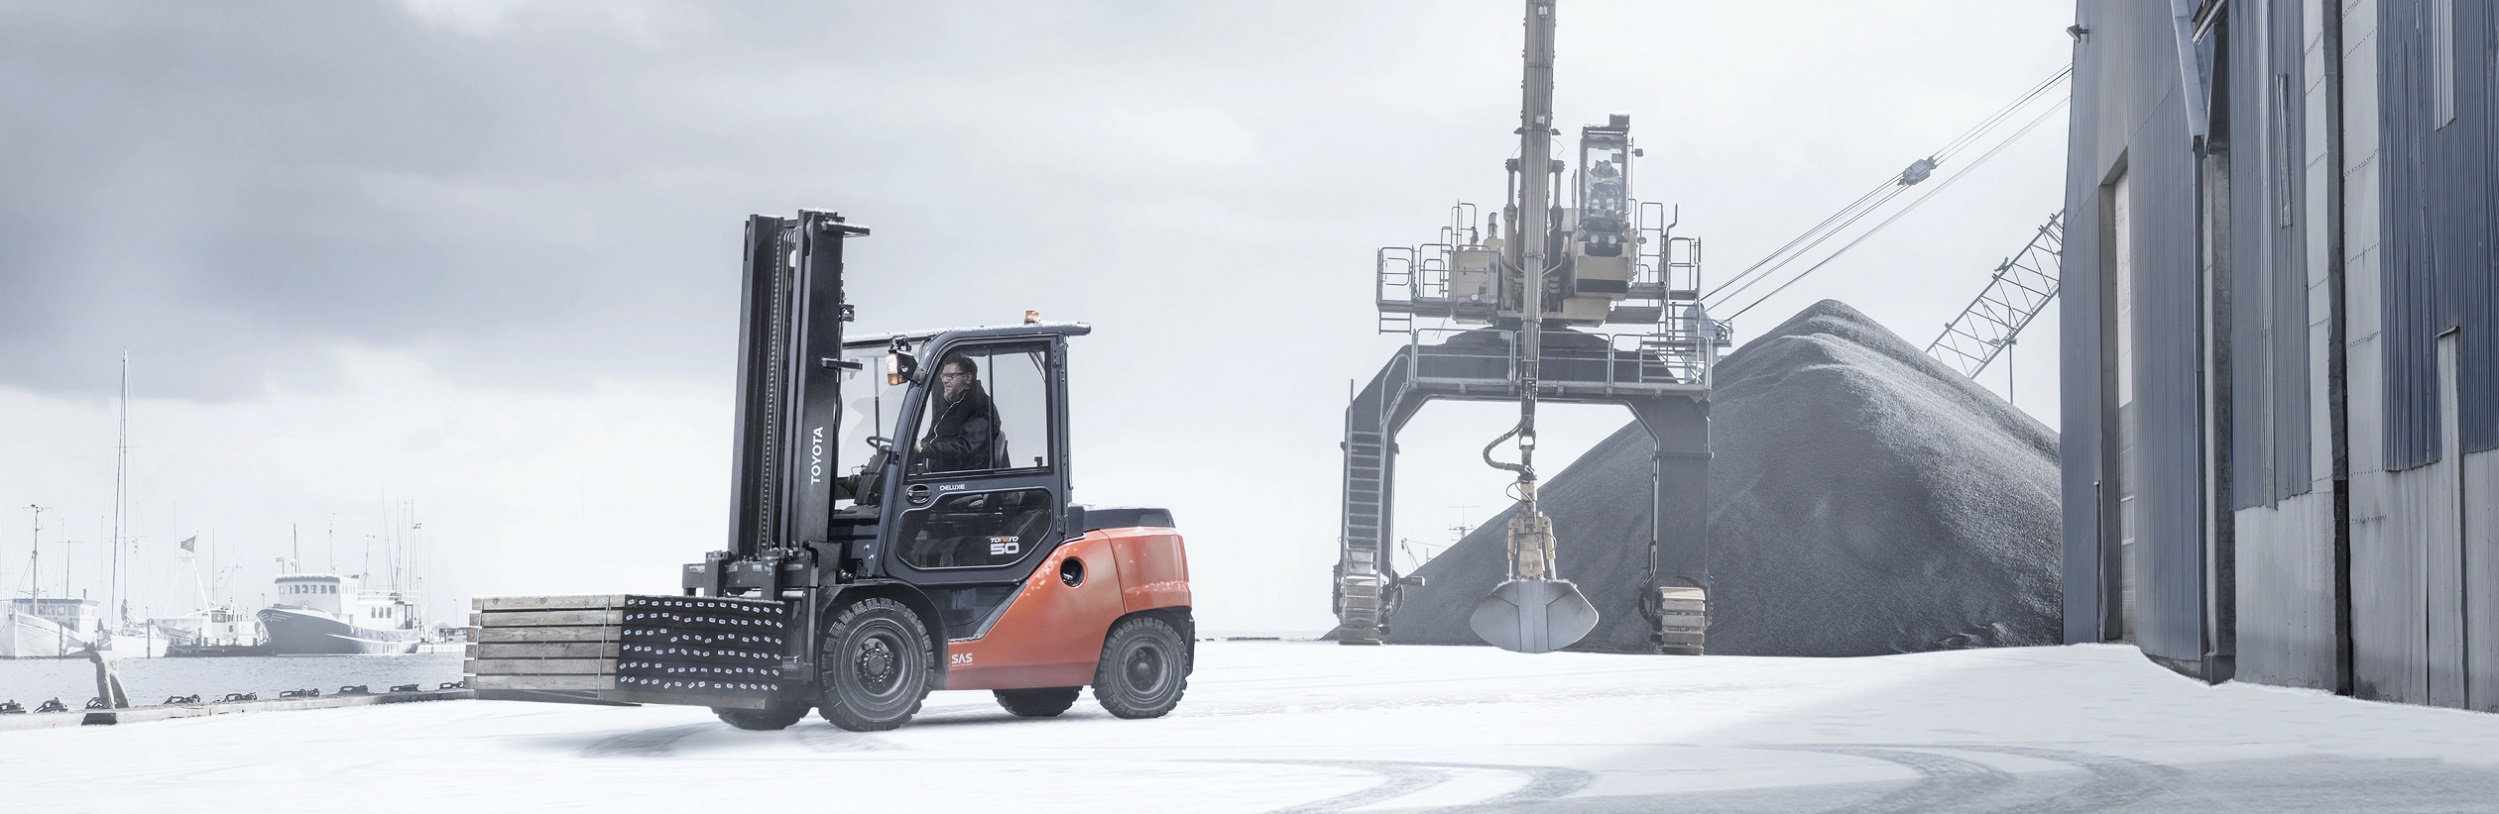 toyota forklift truck operating in winter conditions